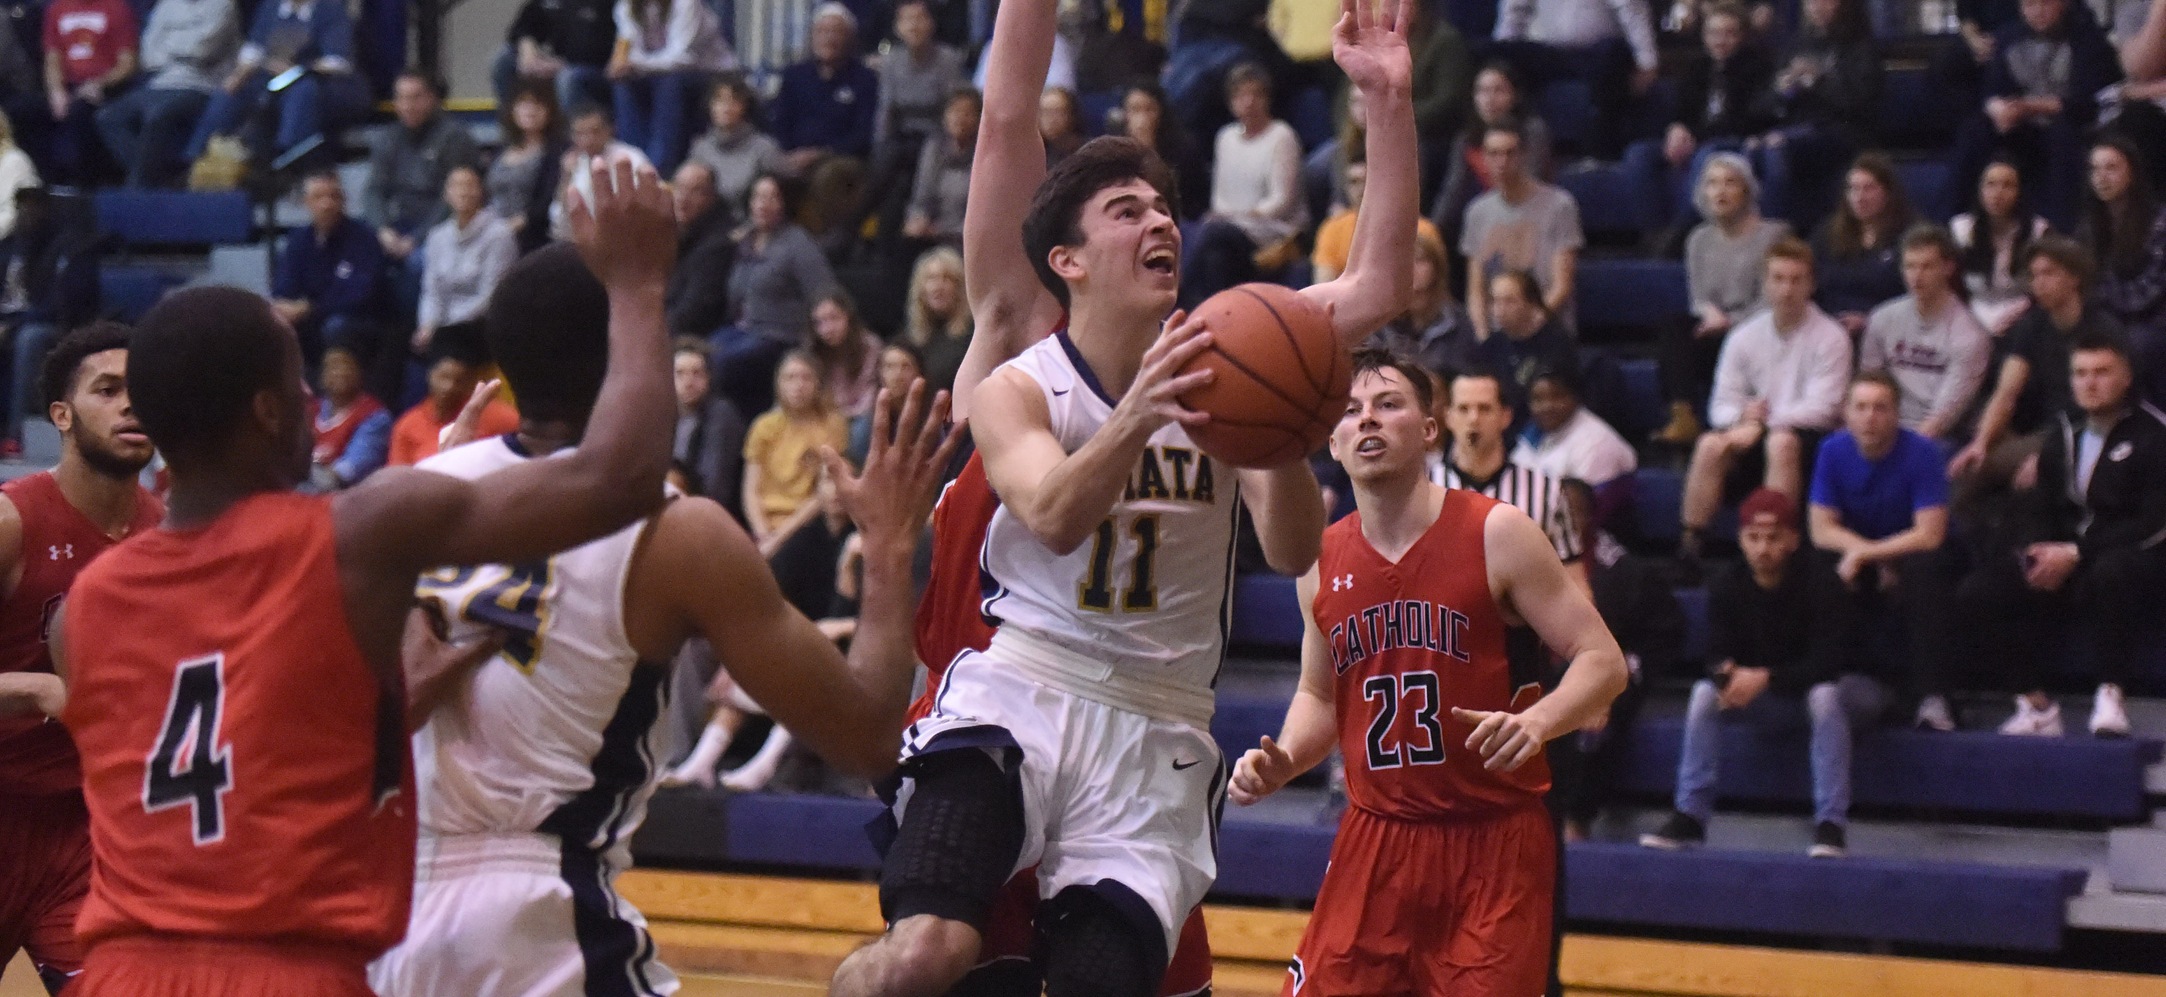 Paul Martello scores two of his career-high 16 inside against Catholic.